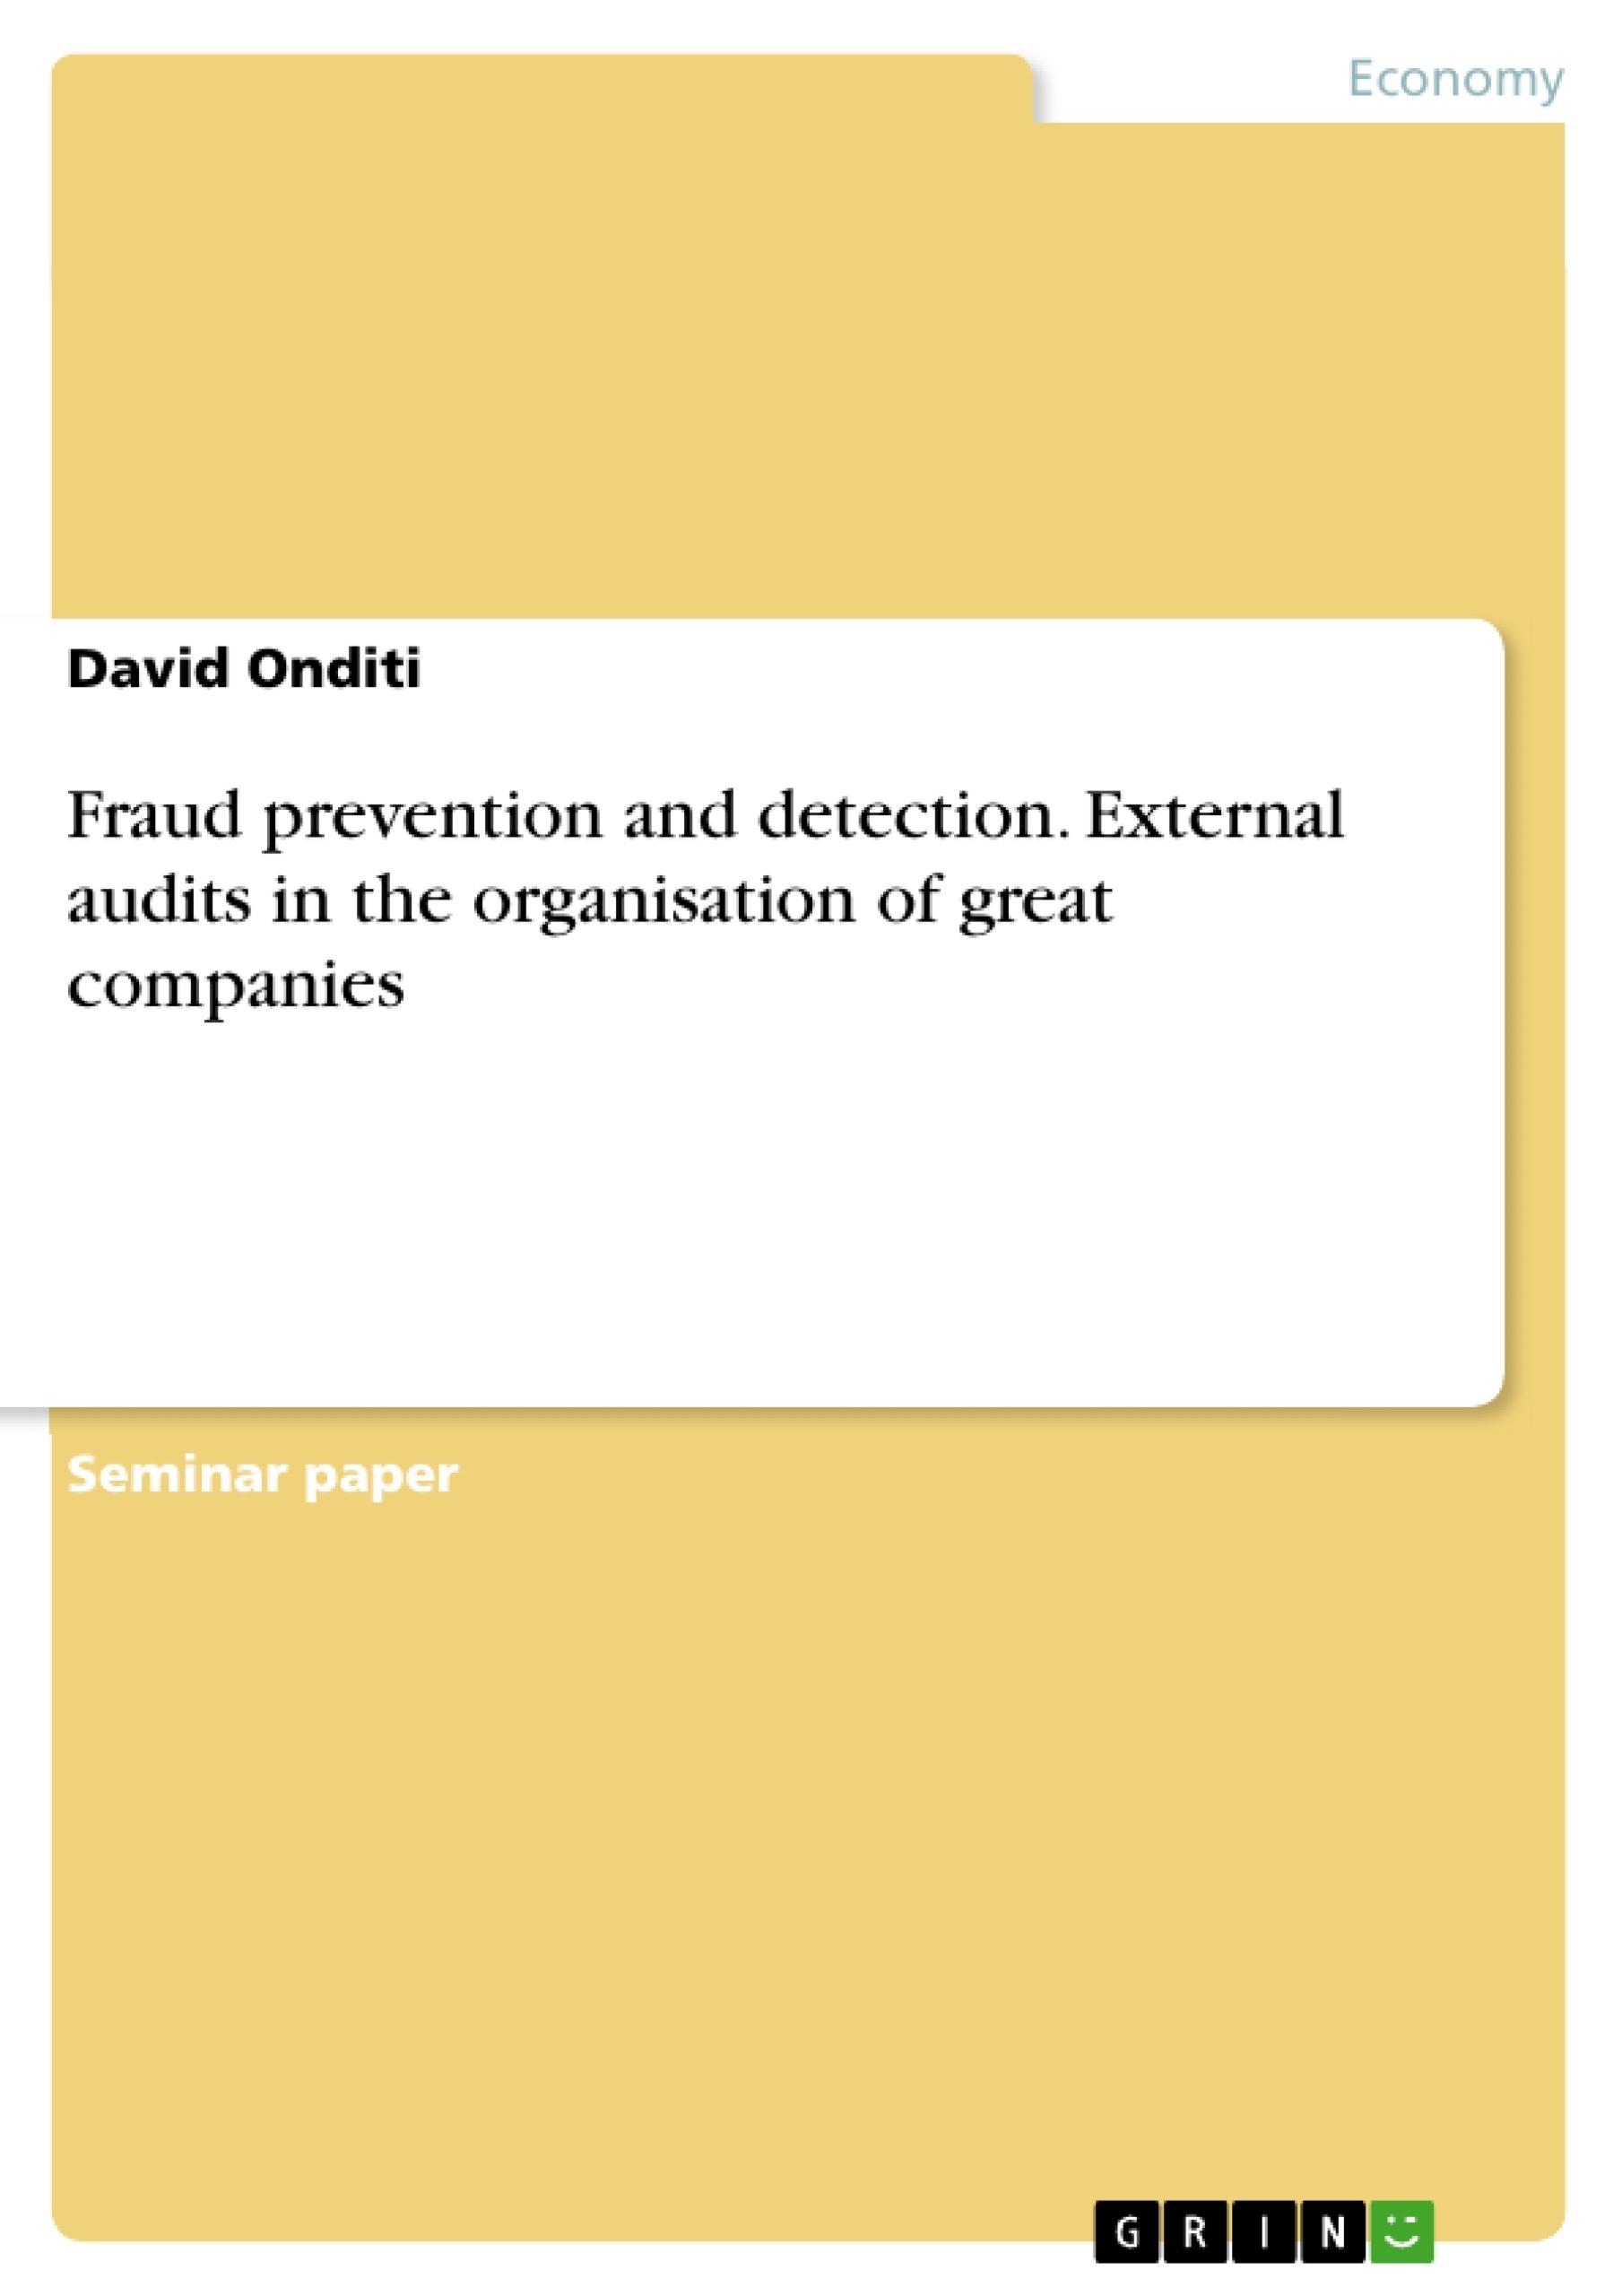 Titel: Fraud prevention and detection. External audits in the organisation of great companies